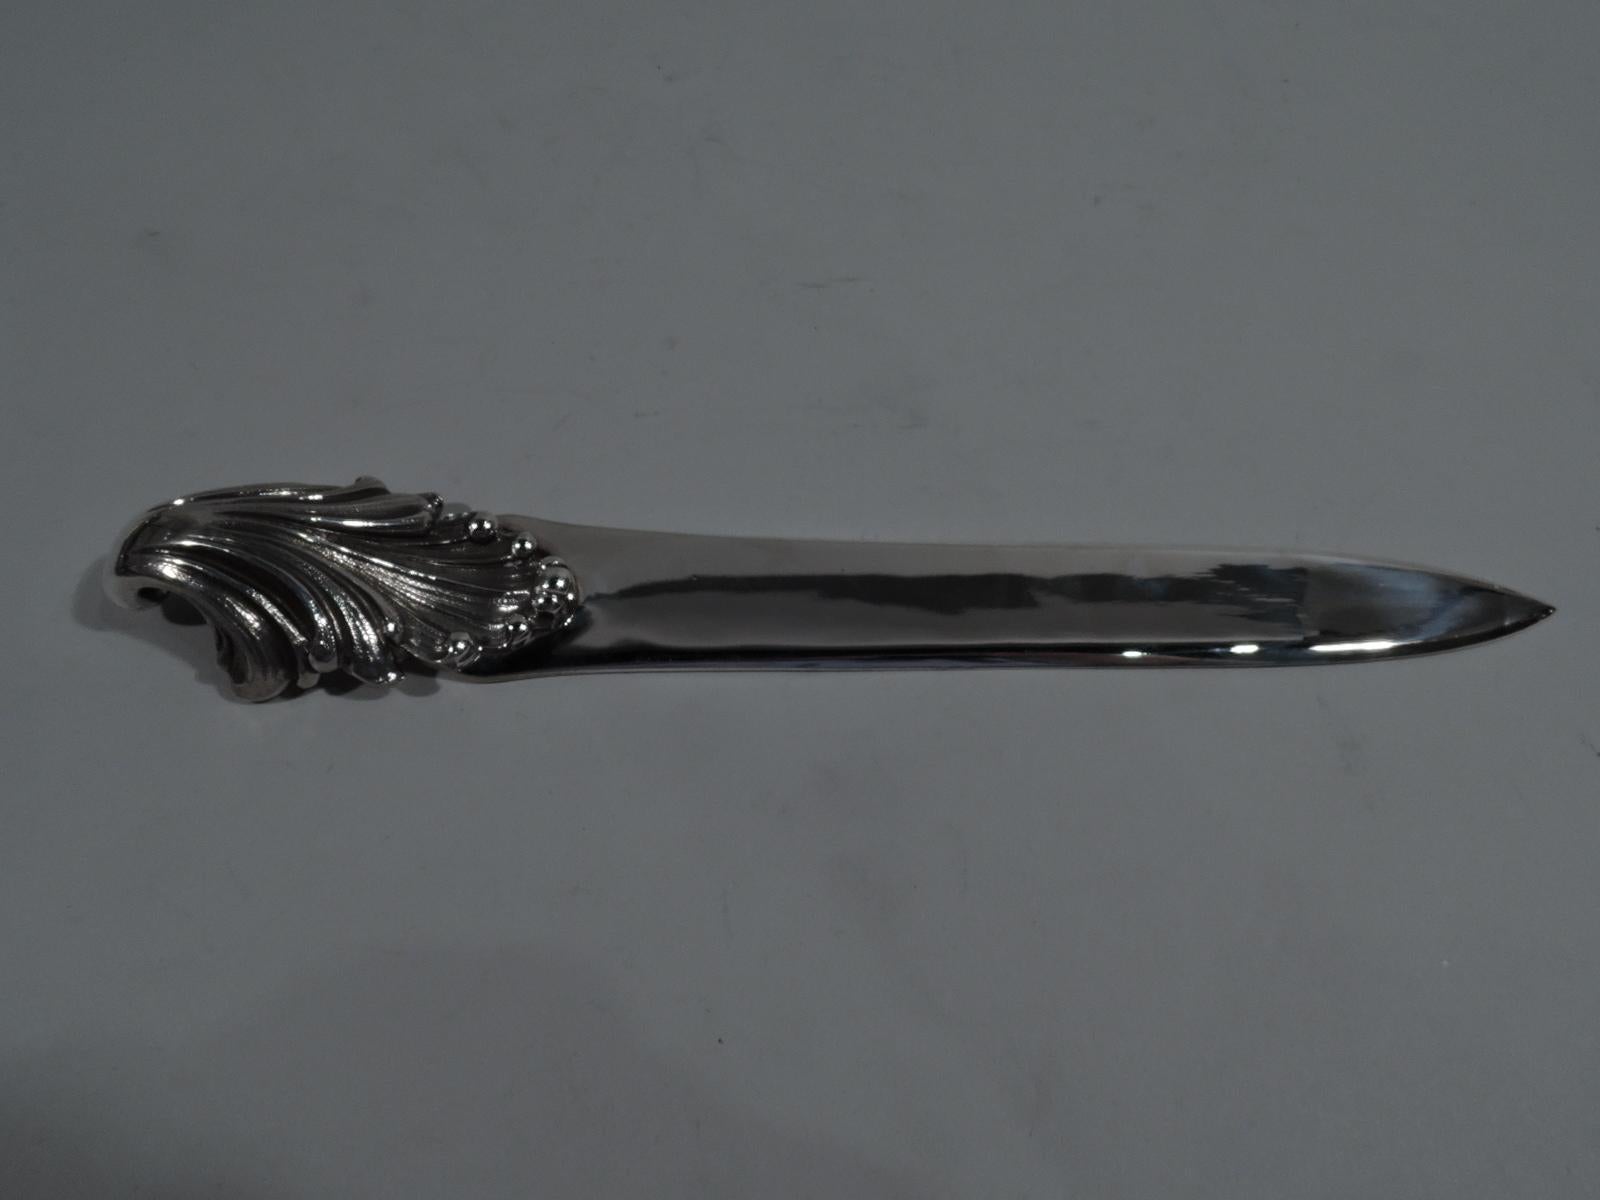 Beautiful sterling silver letter opener. Made by Mario Buccellati in Milan. Plain tapering blade and applied handle in form of fluid and dynamic leafy shell. A marvelous return-to-paper desk accessory. Italian hallmark (1944-1968) including maker’s